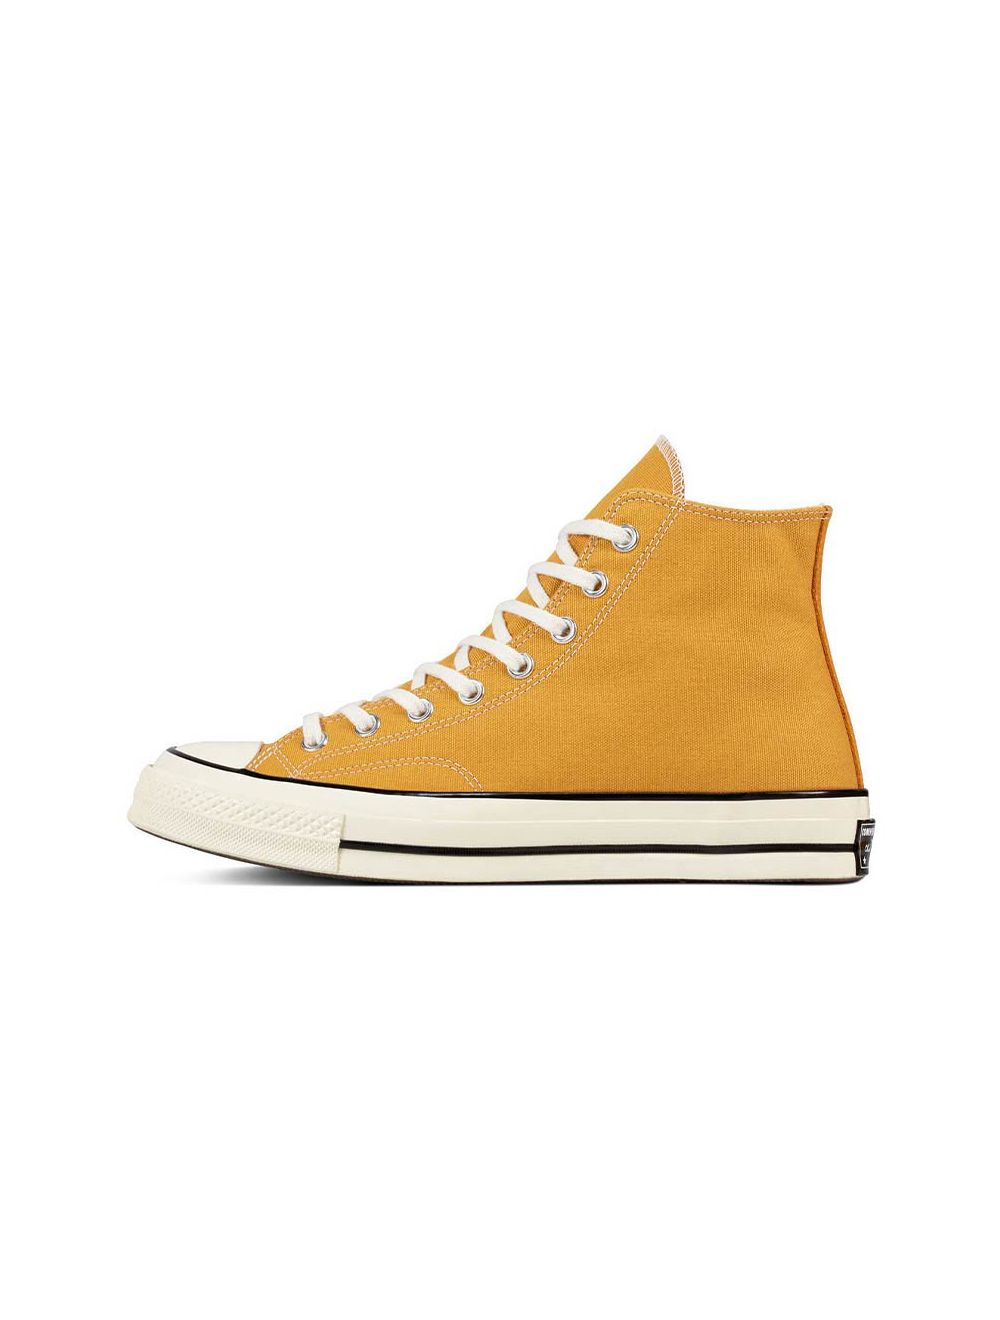 Converse Chuck Taylor All Star 70 Hi Youth Sneaker Yellow